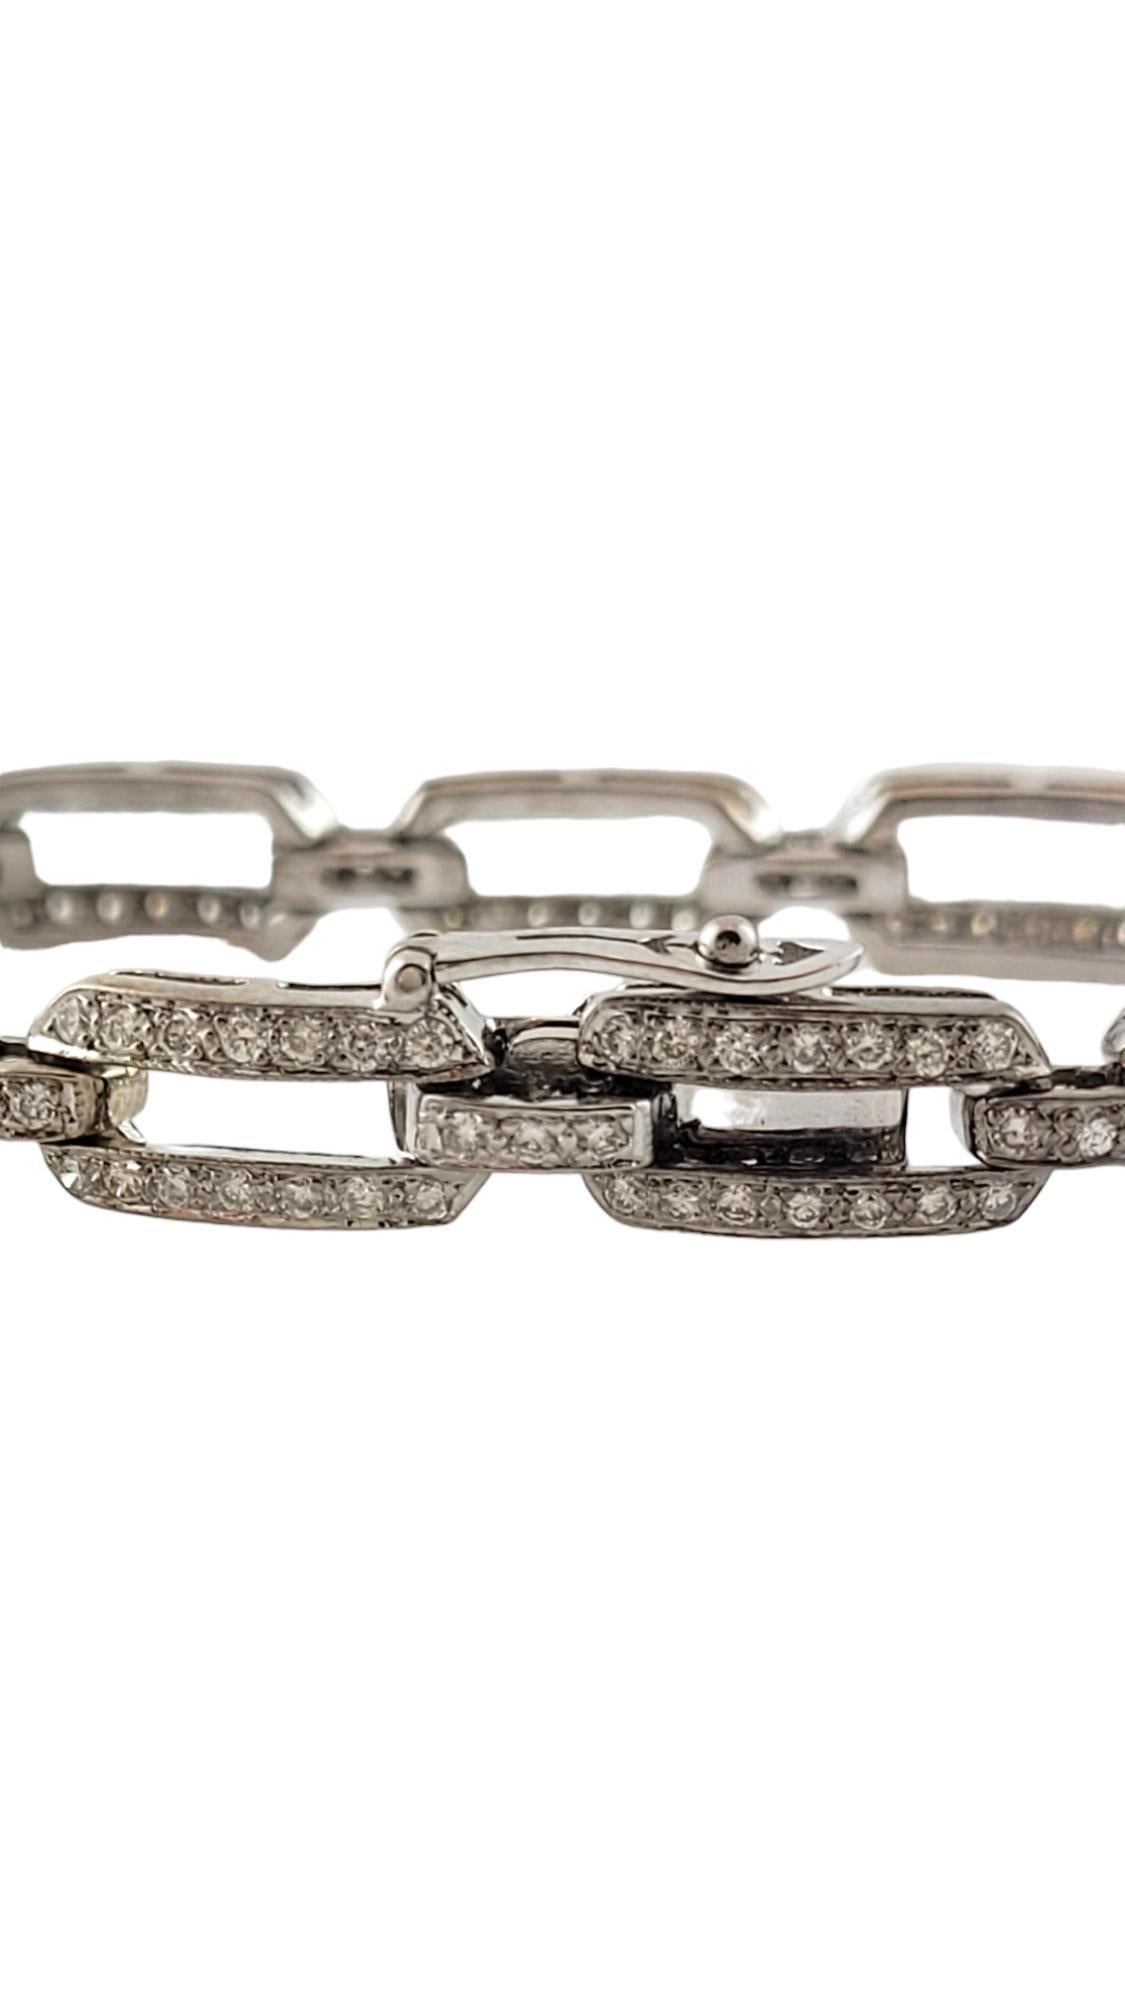 18 Karat White Gold and Diamond Link Bracelet #16972 In Good Condition For Sale In Washington Depot, CT